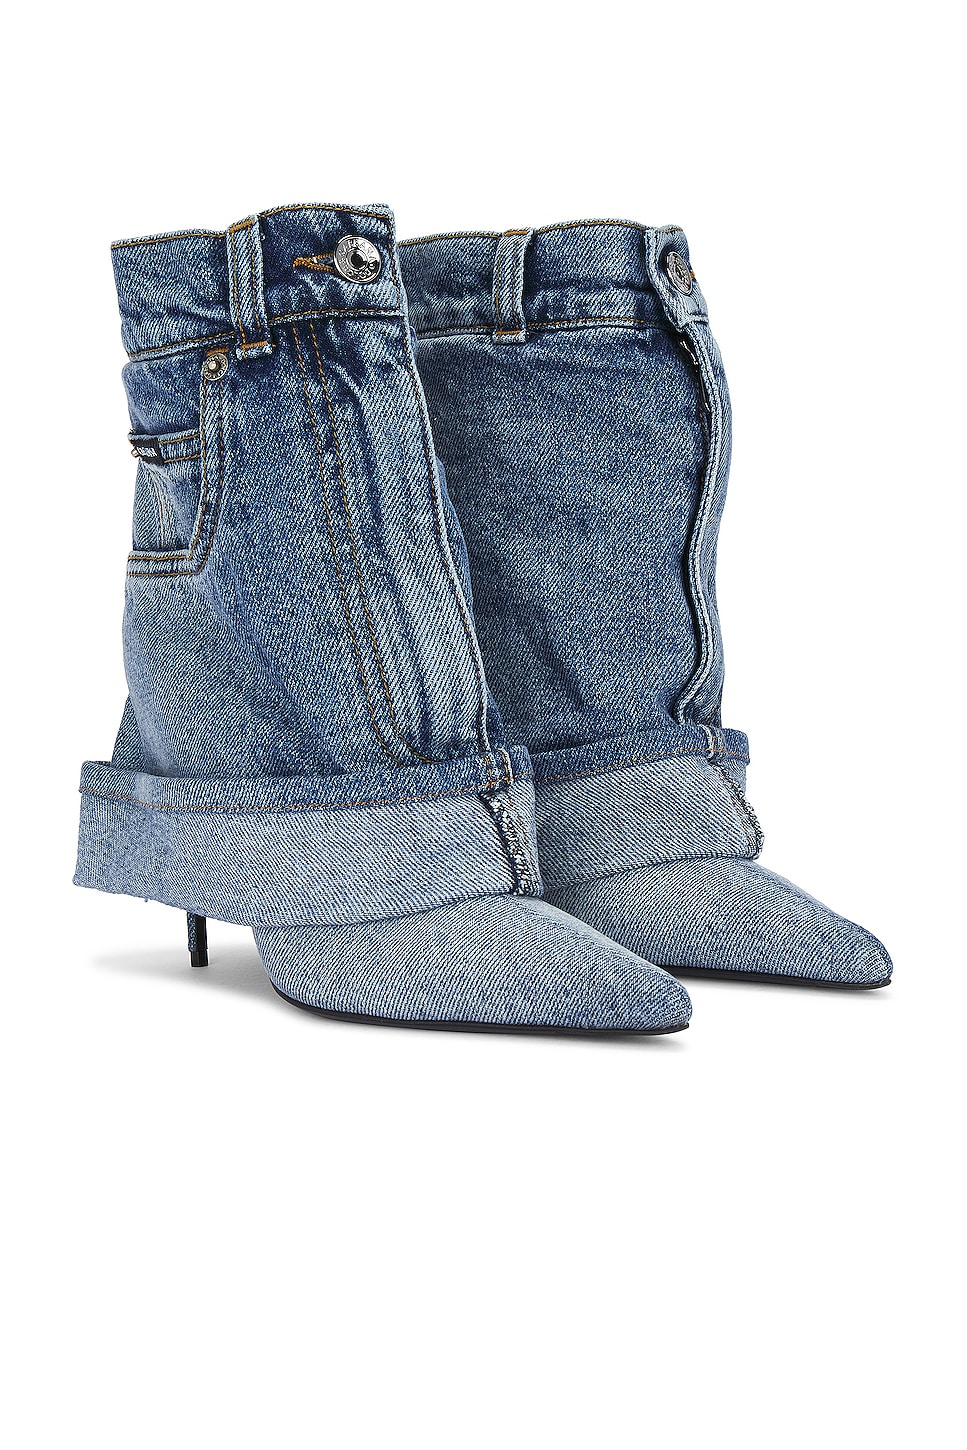 Image 1 of Dolce & Gabbana Pant Boot in Blue